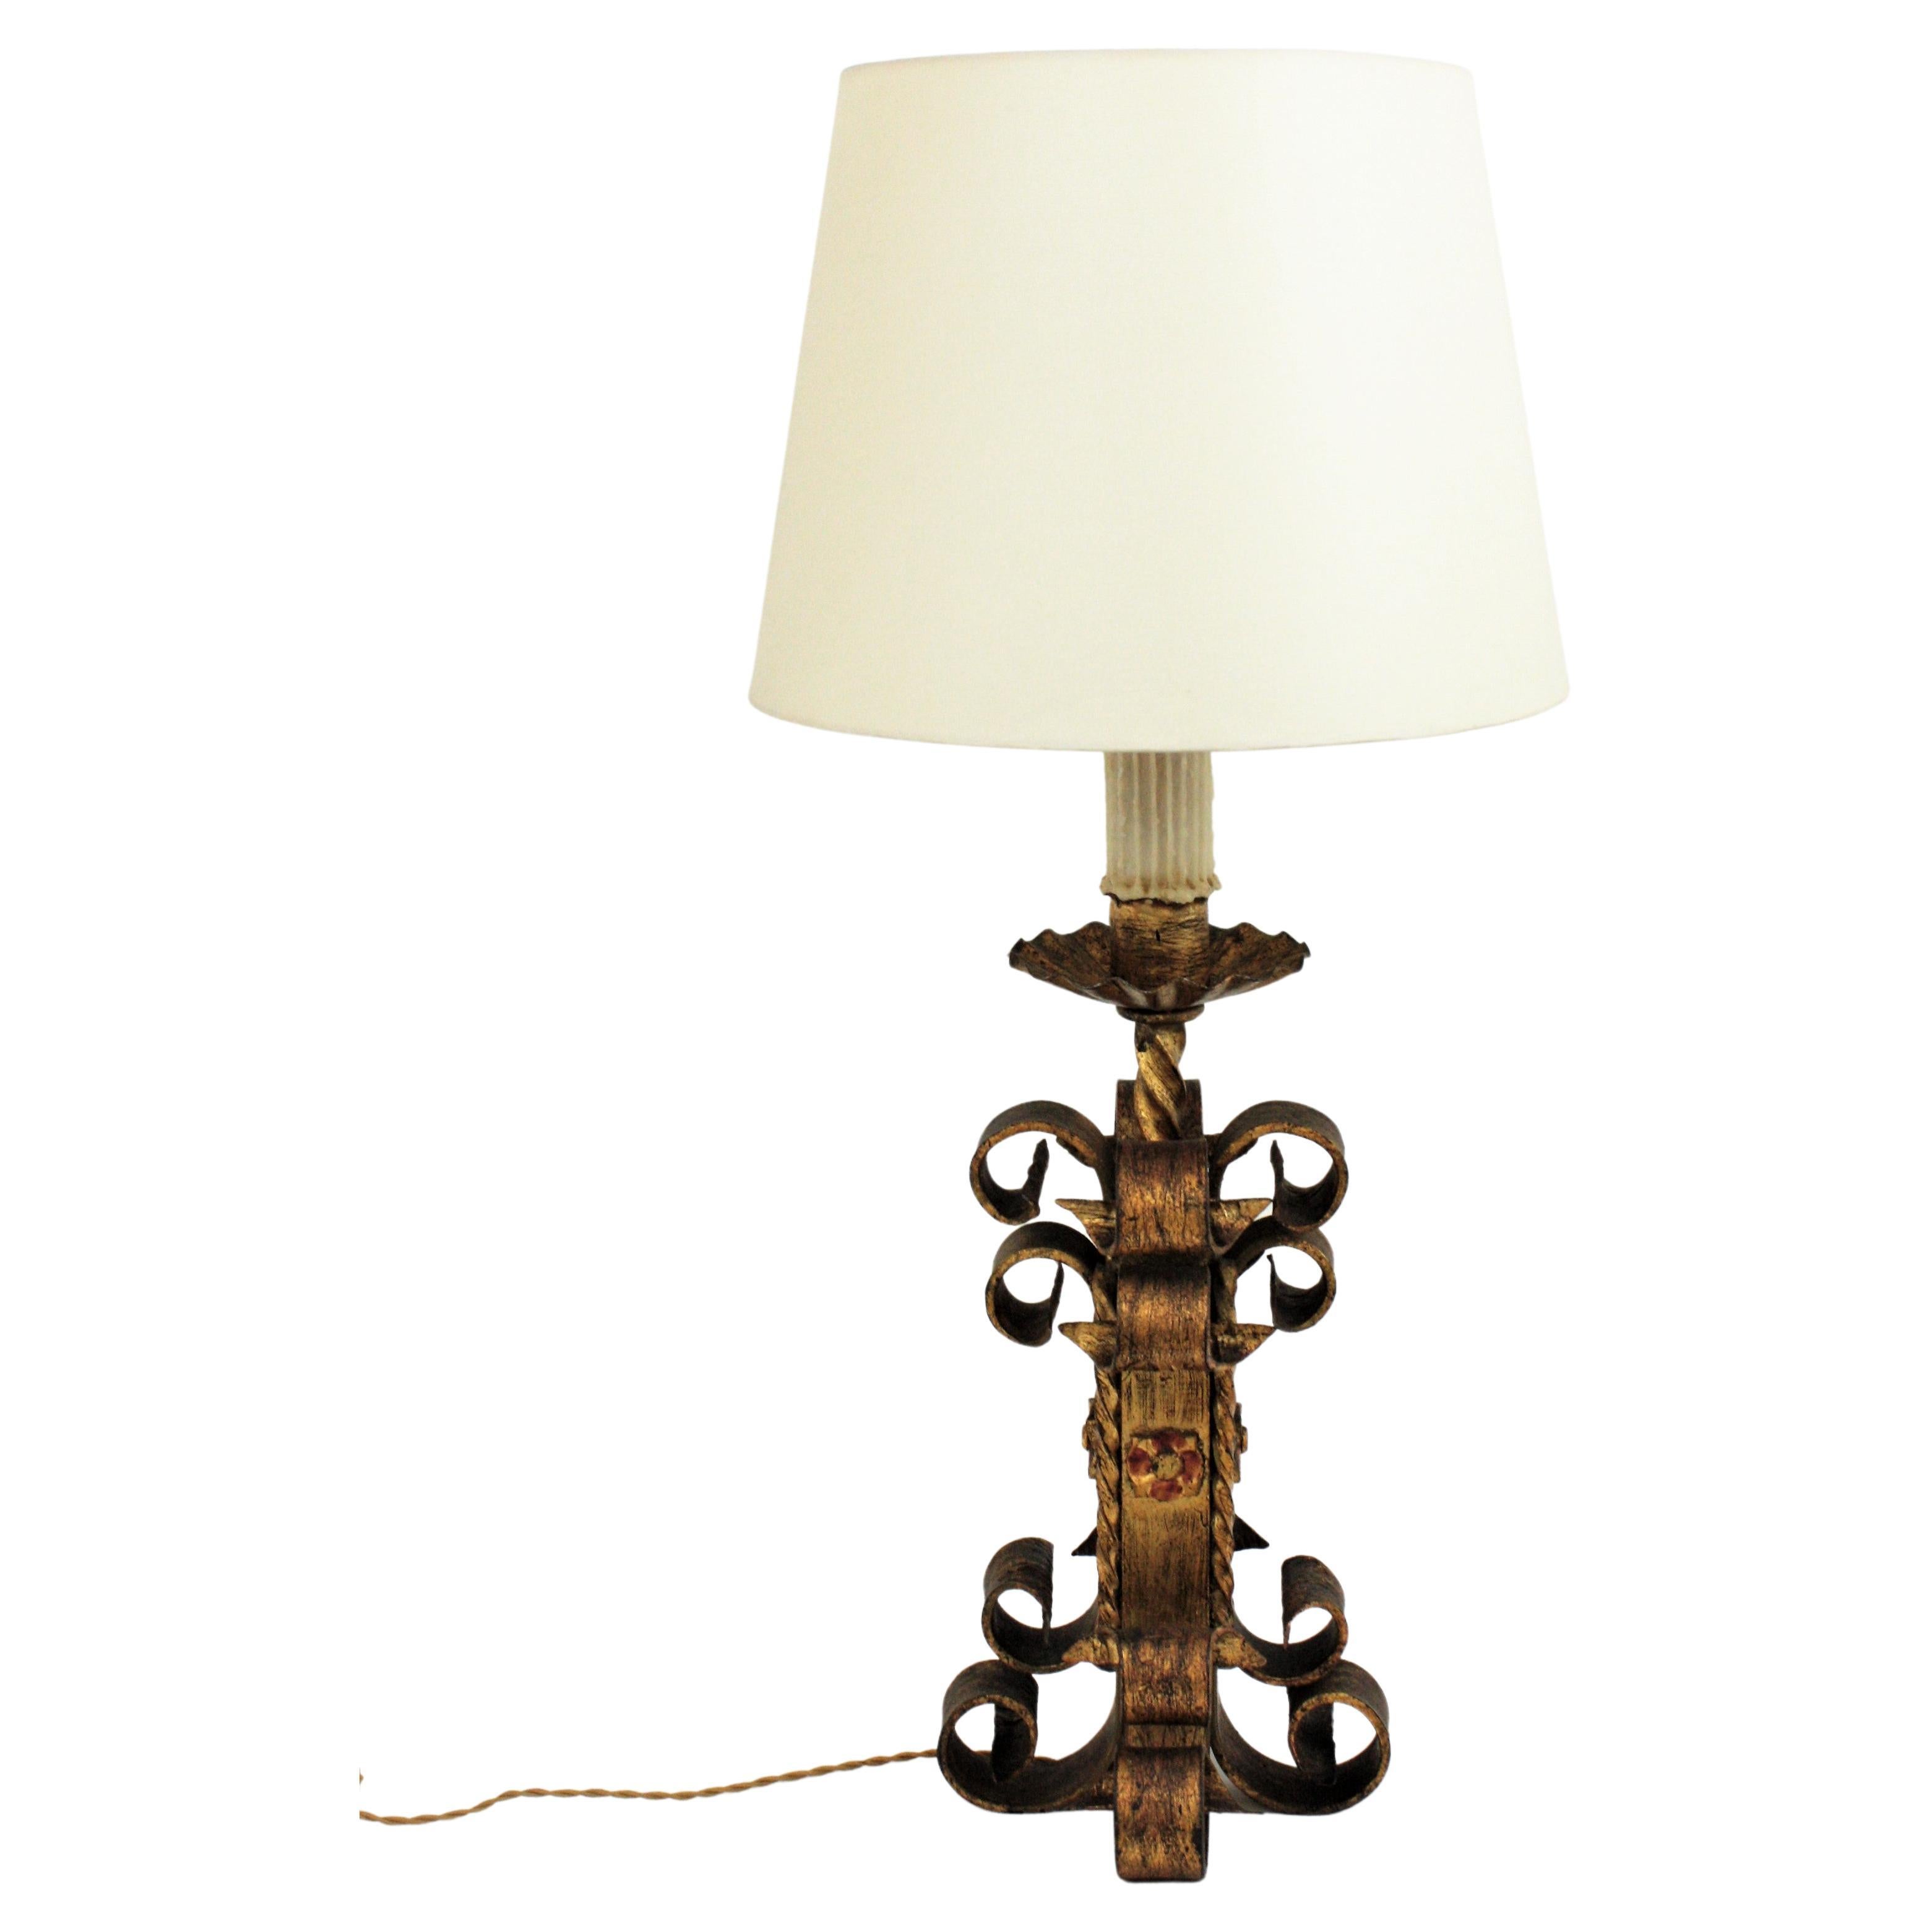 Hand-Forged Gold Leaf Gilt Iron Table Lamp with Scrollwork Design. Spain, 1940s.
This gorgeous table lamp is entirely made by hand. The base has a heavy construction made of scrolled pieces on four sides. Floral decorations and twisted details